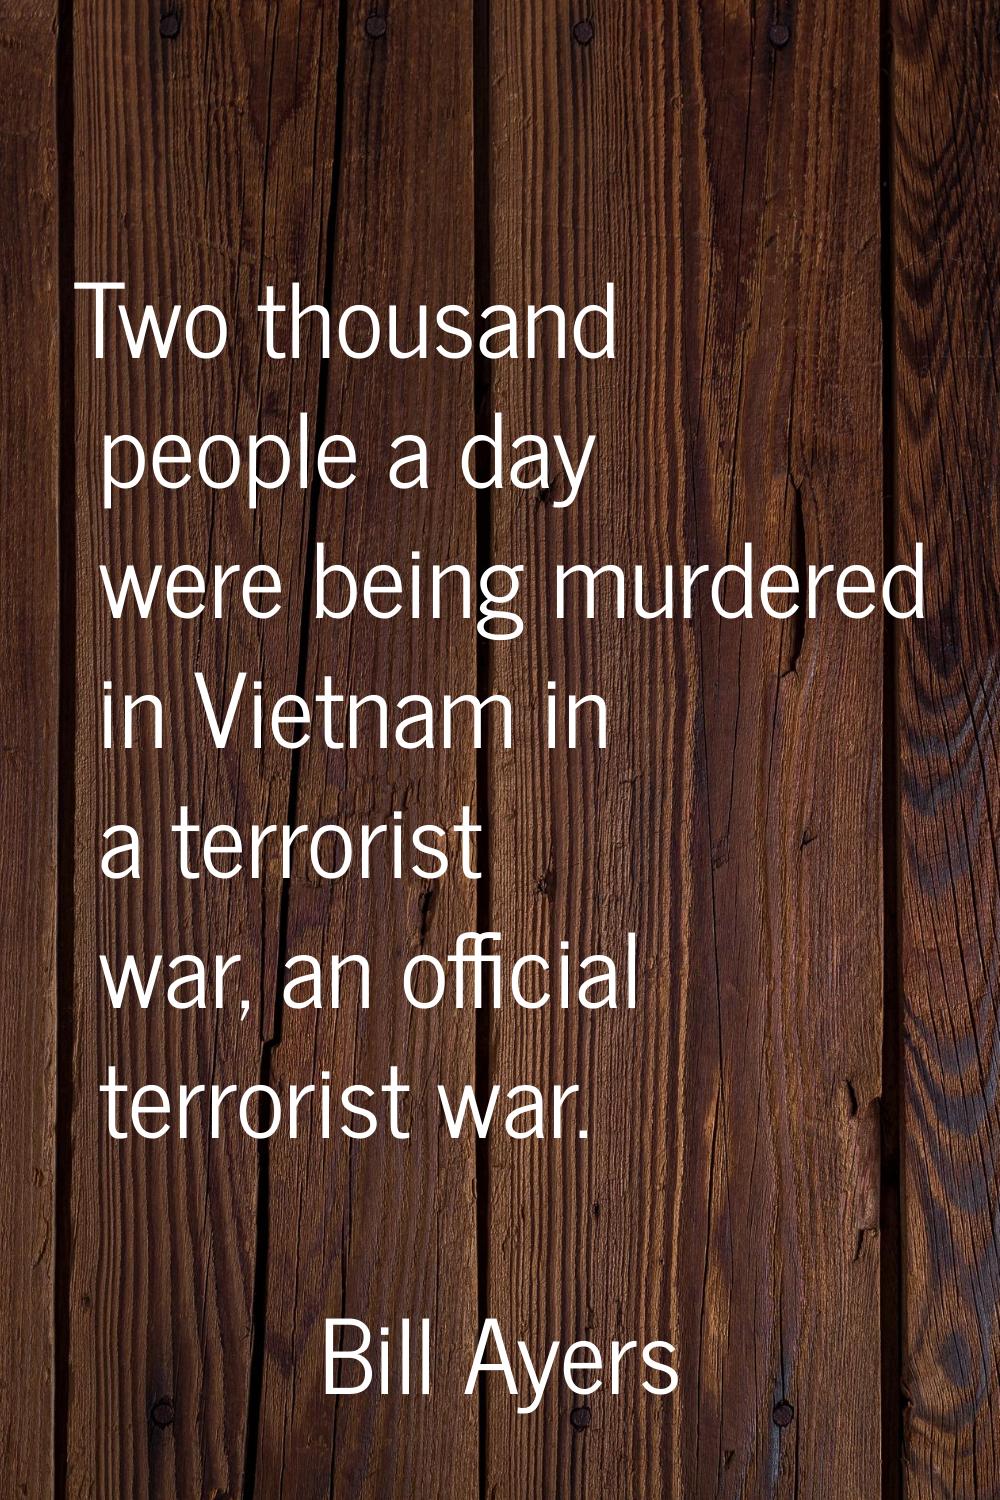 Two thousand people a day were being murdered in Vietnam in a terrorist war, an official terrorist 